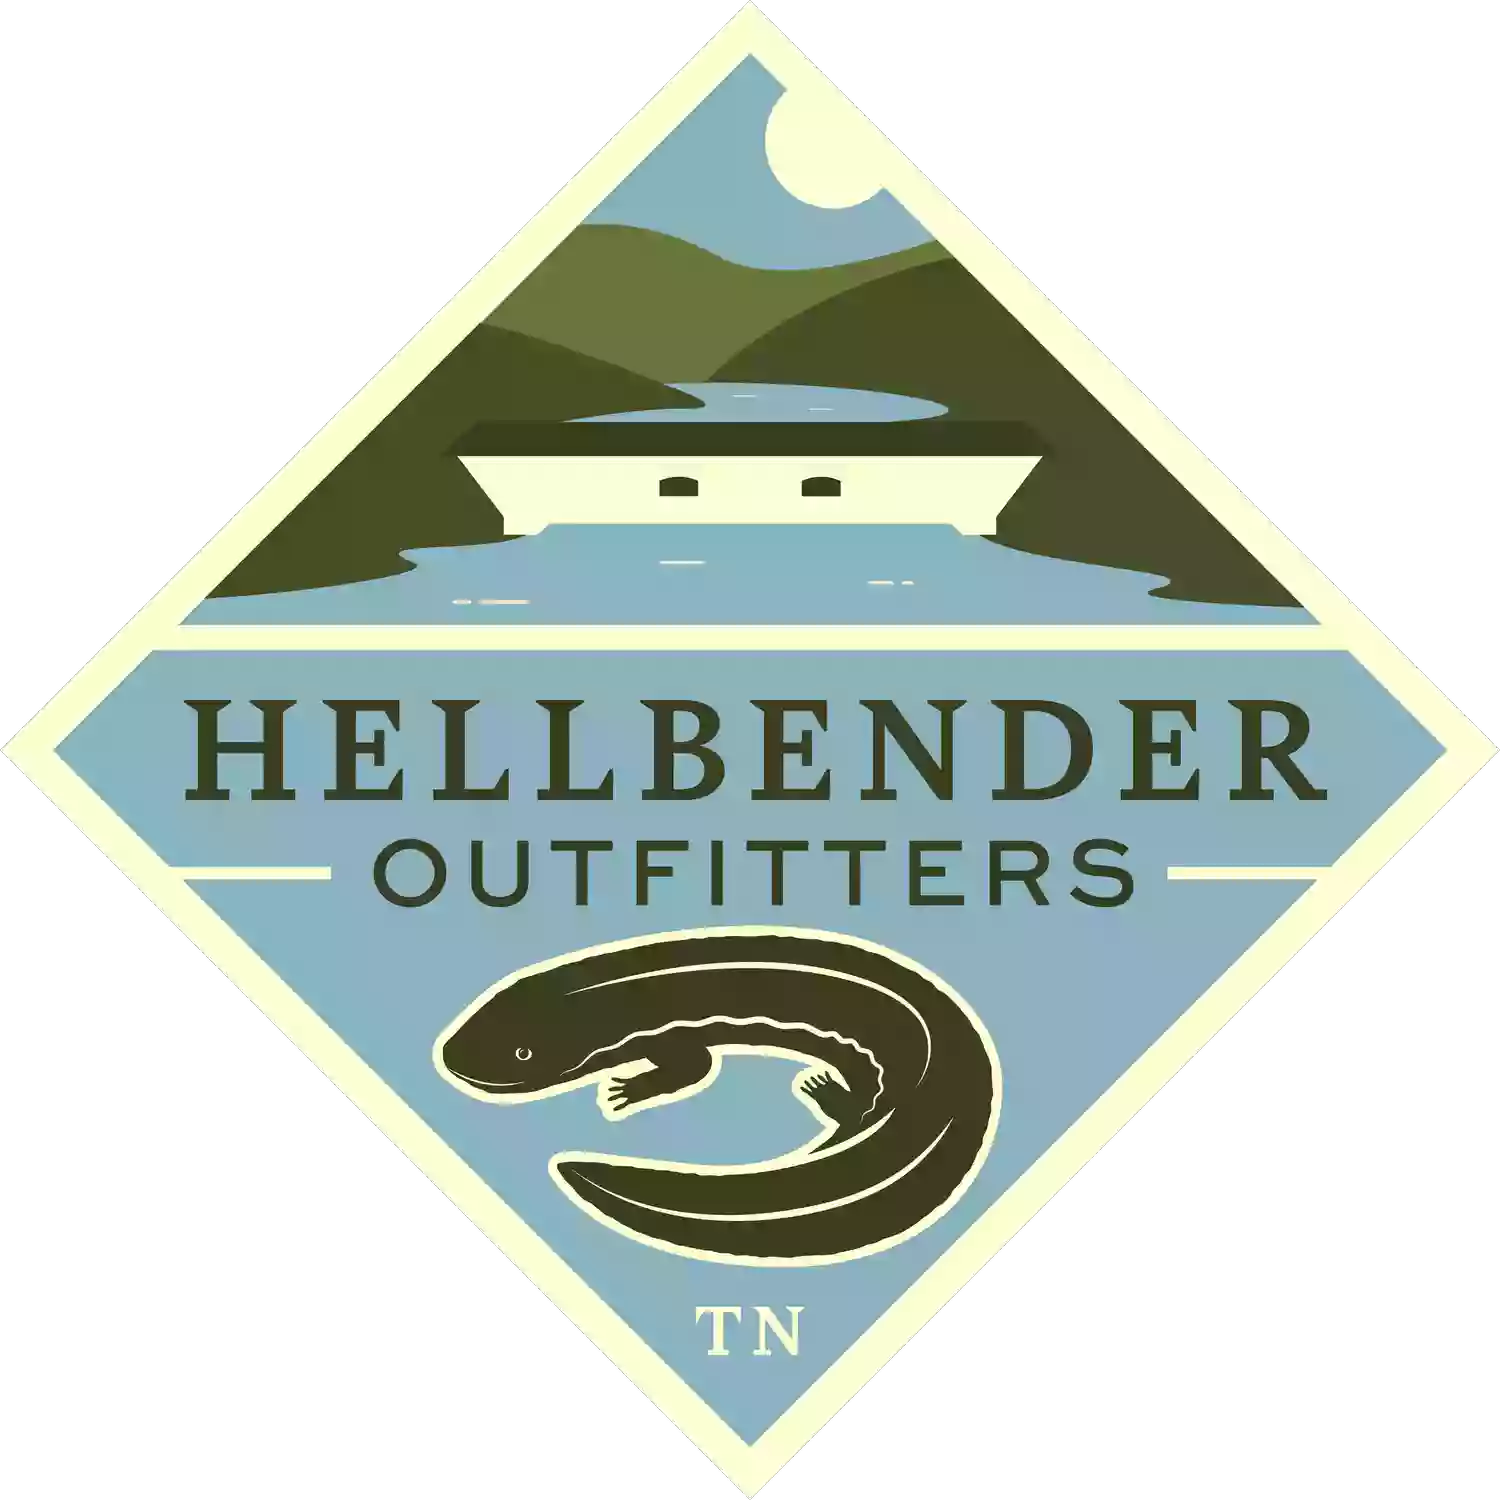 Hellbender Outfitters